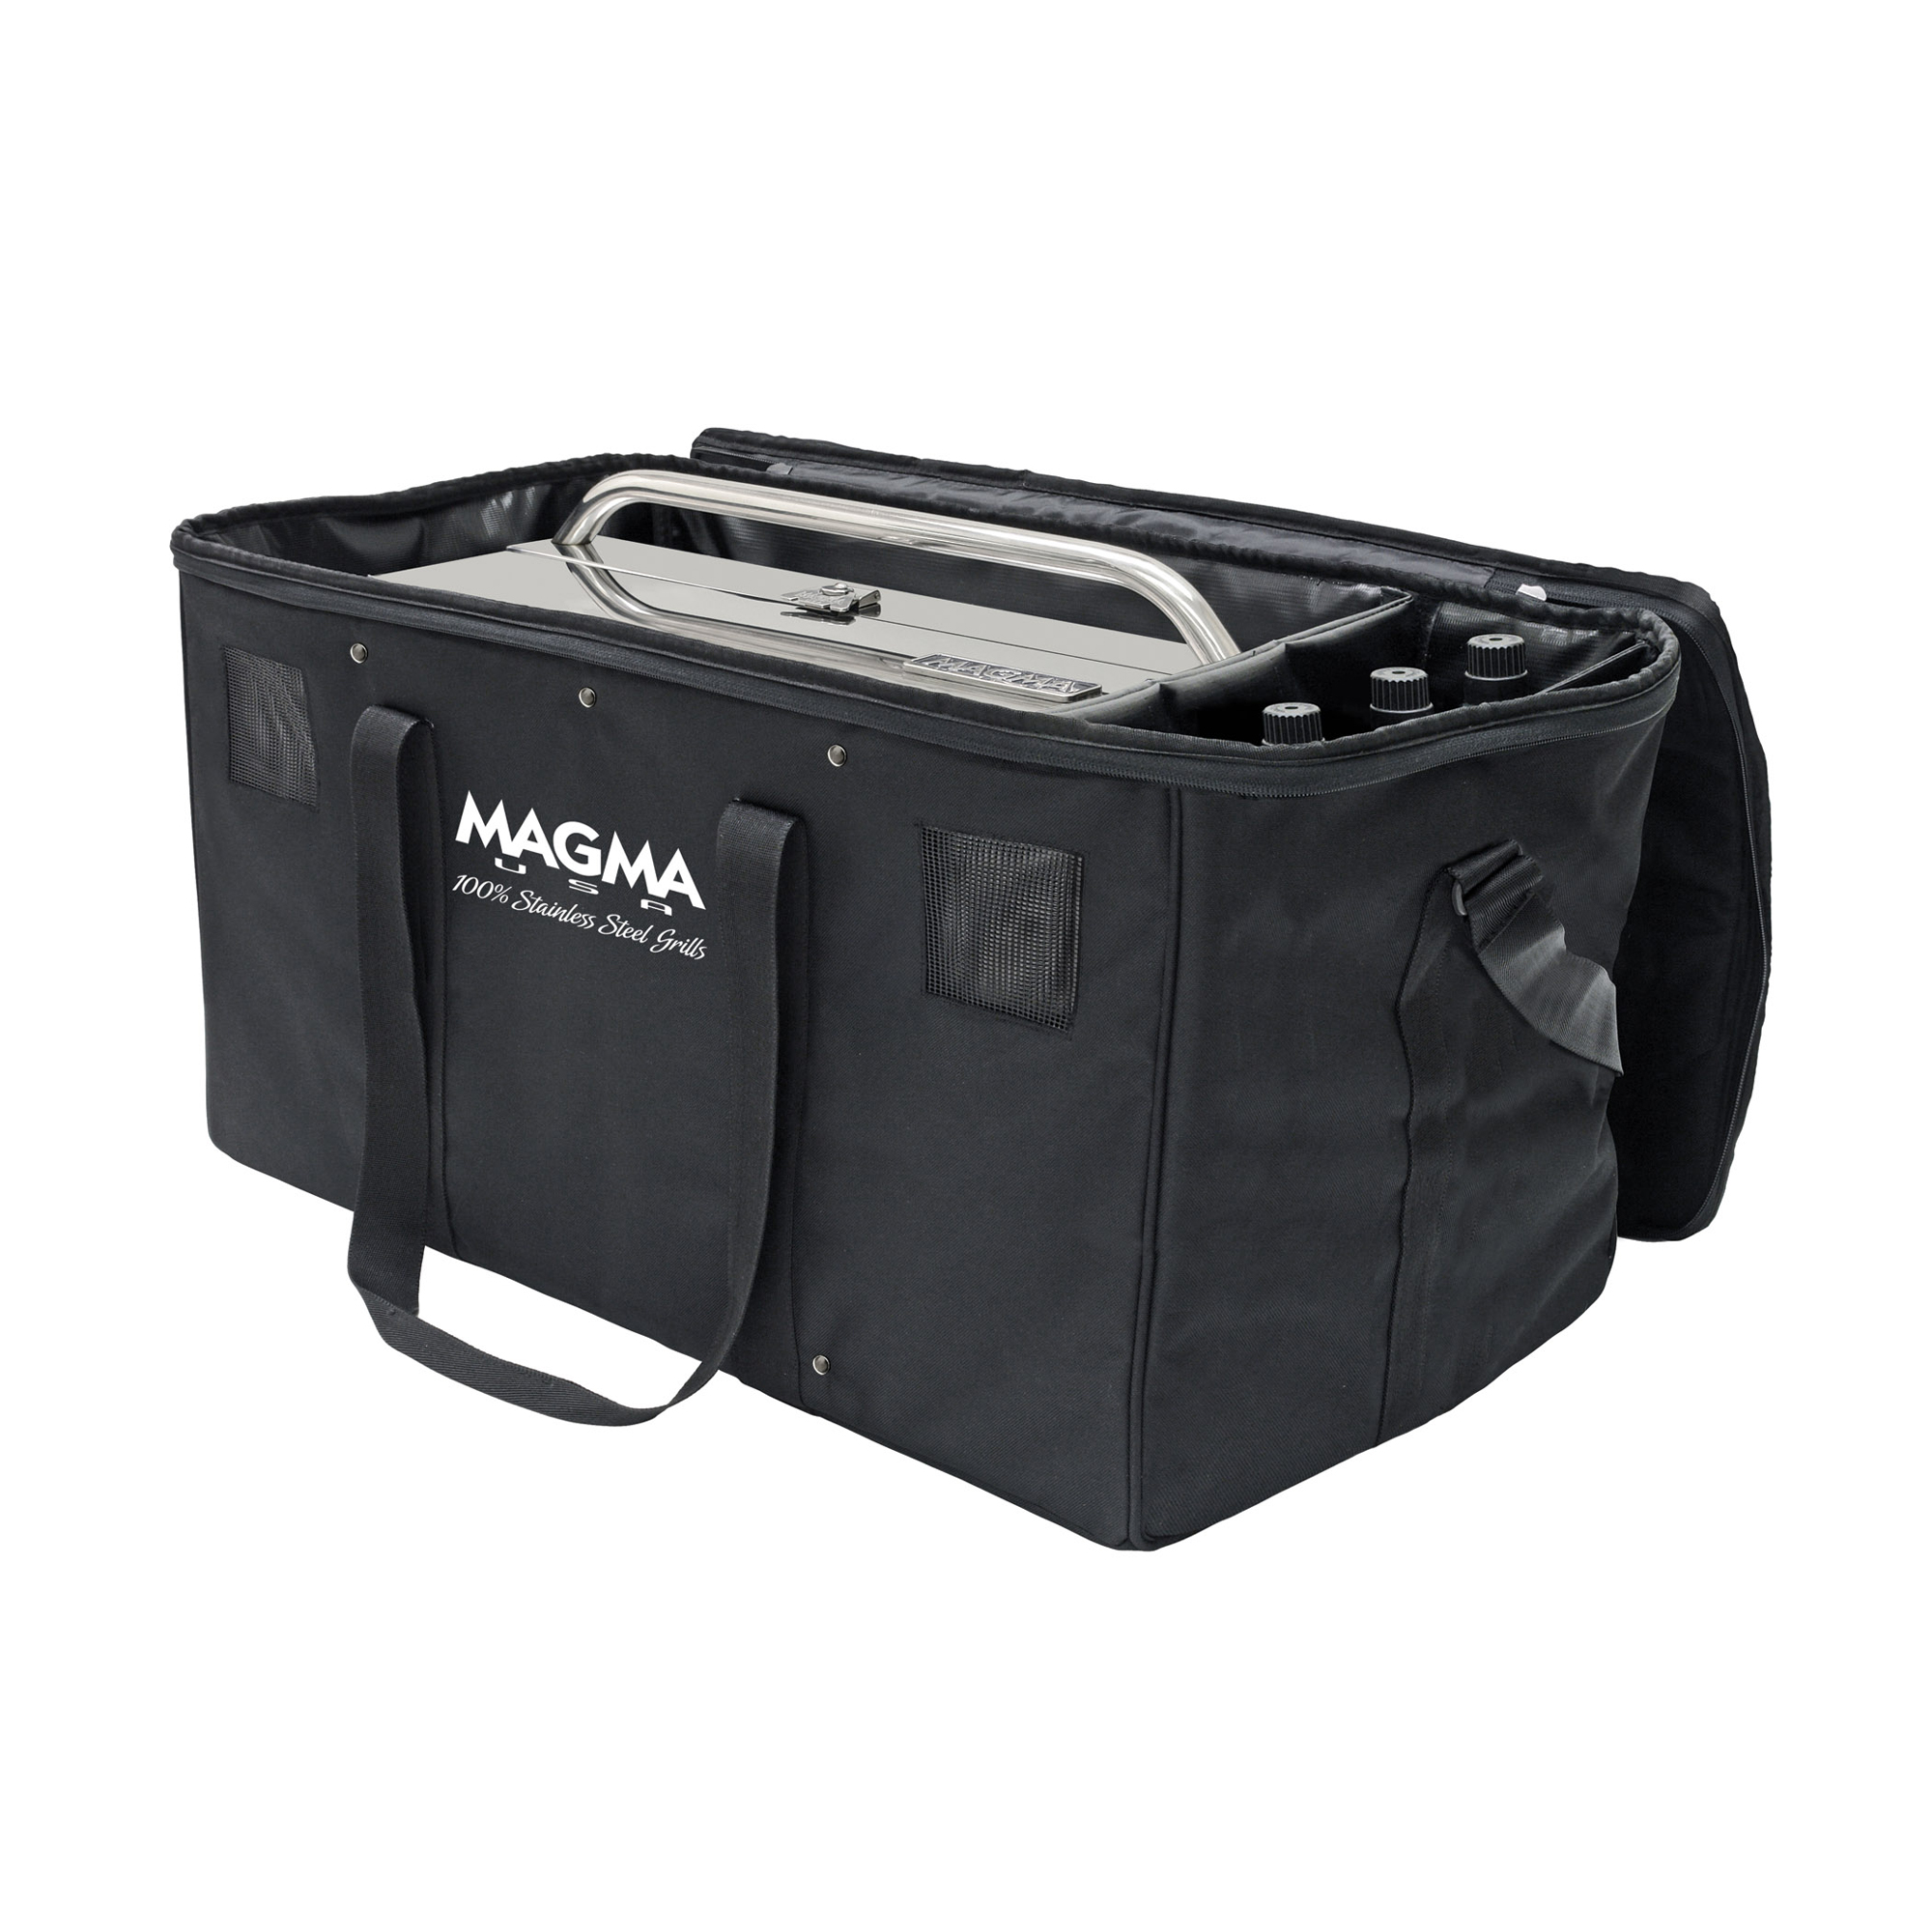 Magma A10-1292 Padded 12 x 18 Inch Rectangular Grill Gear Carrying Case, Black - image 2 of 3